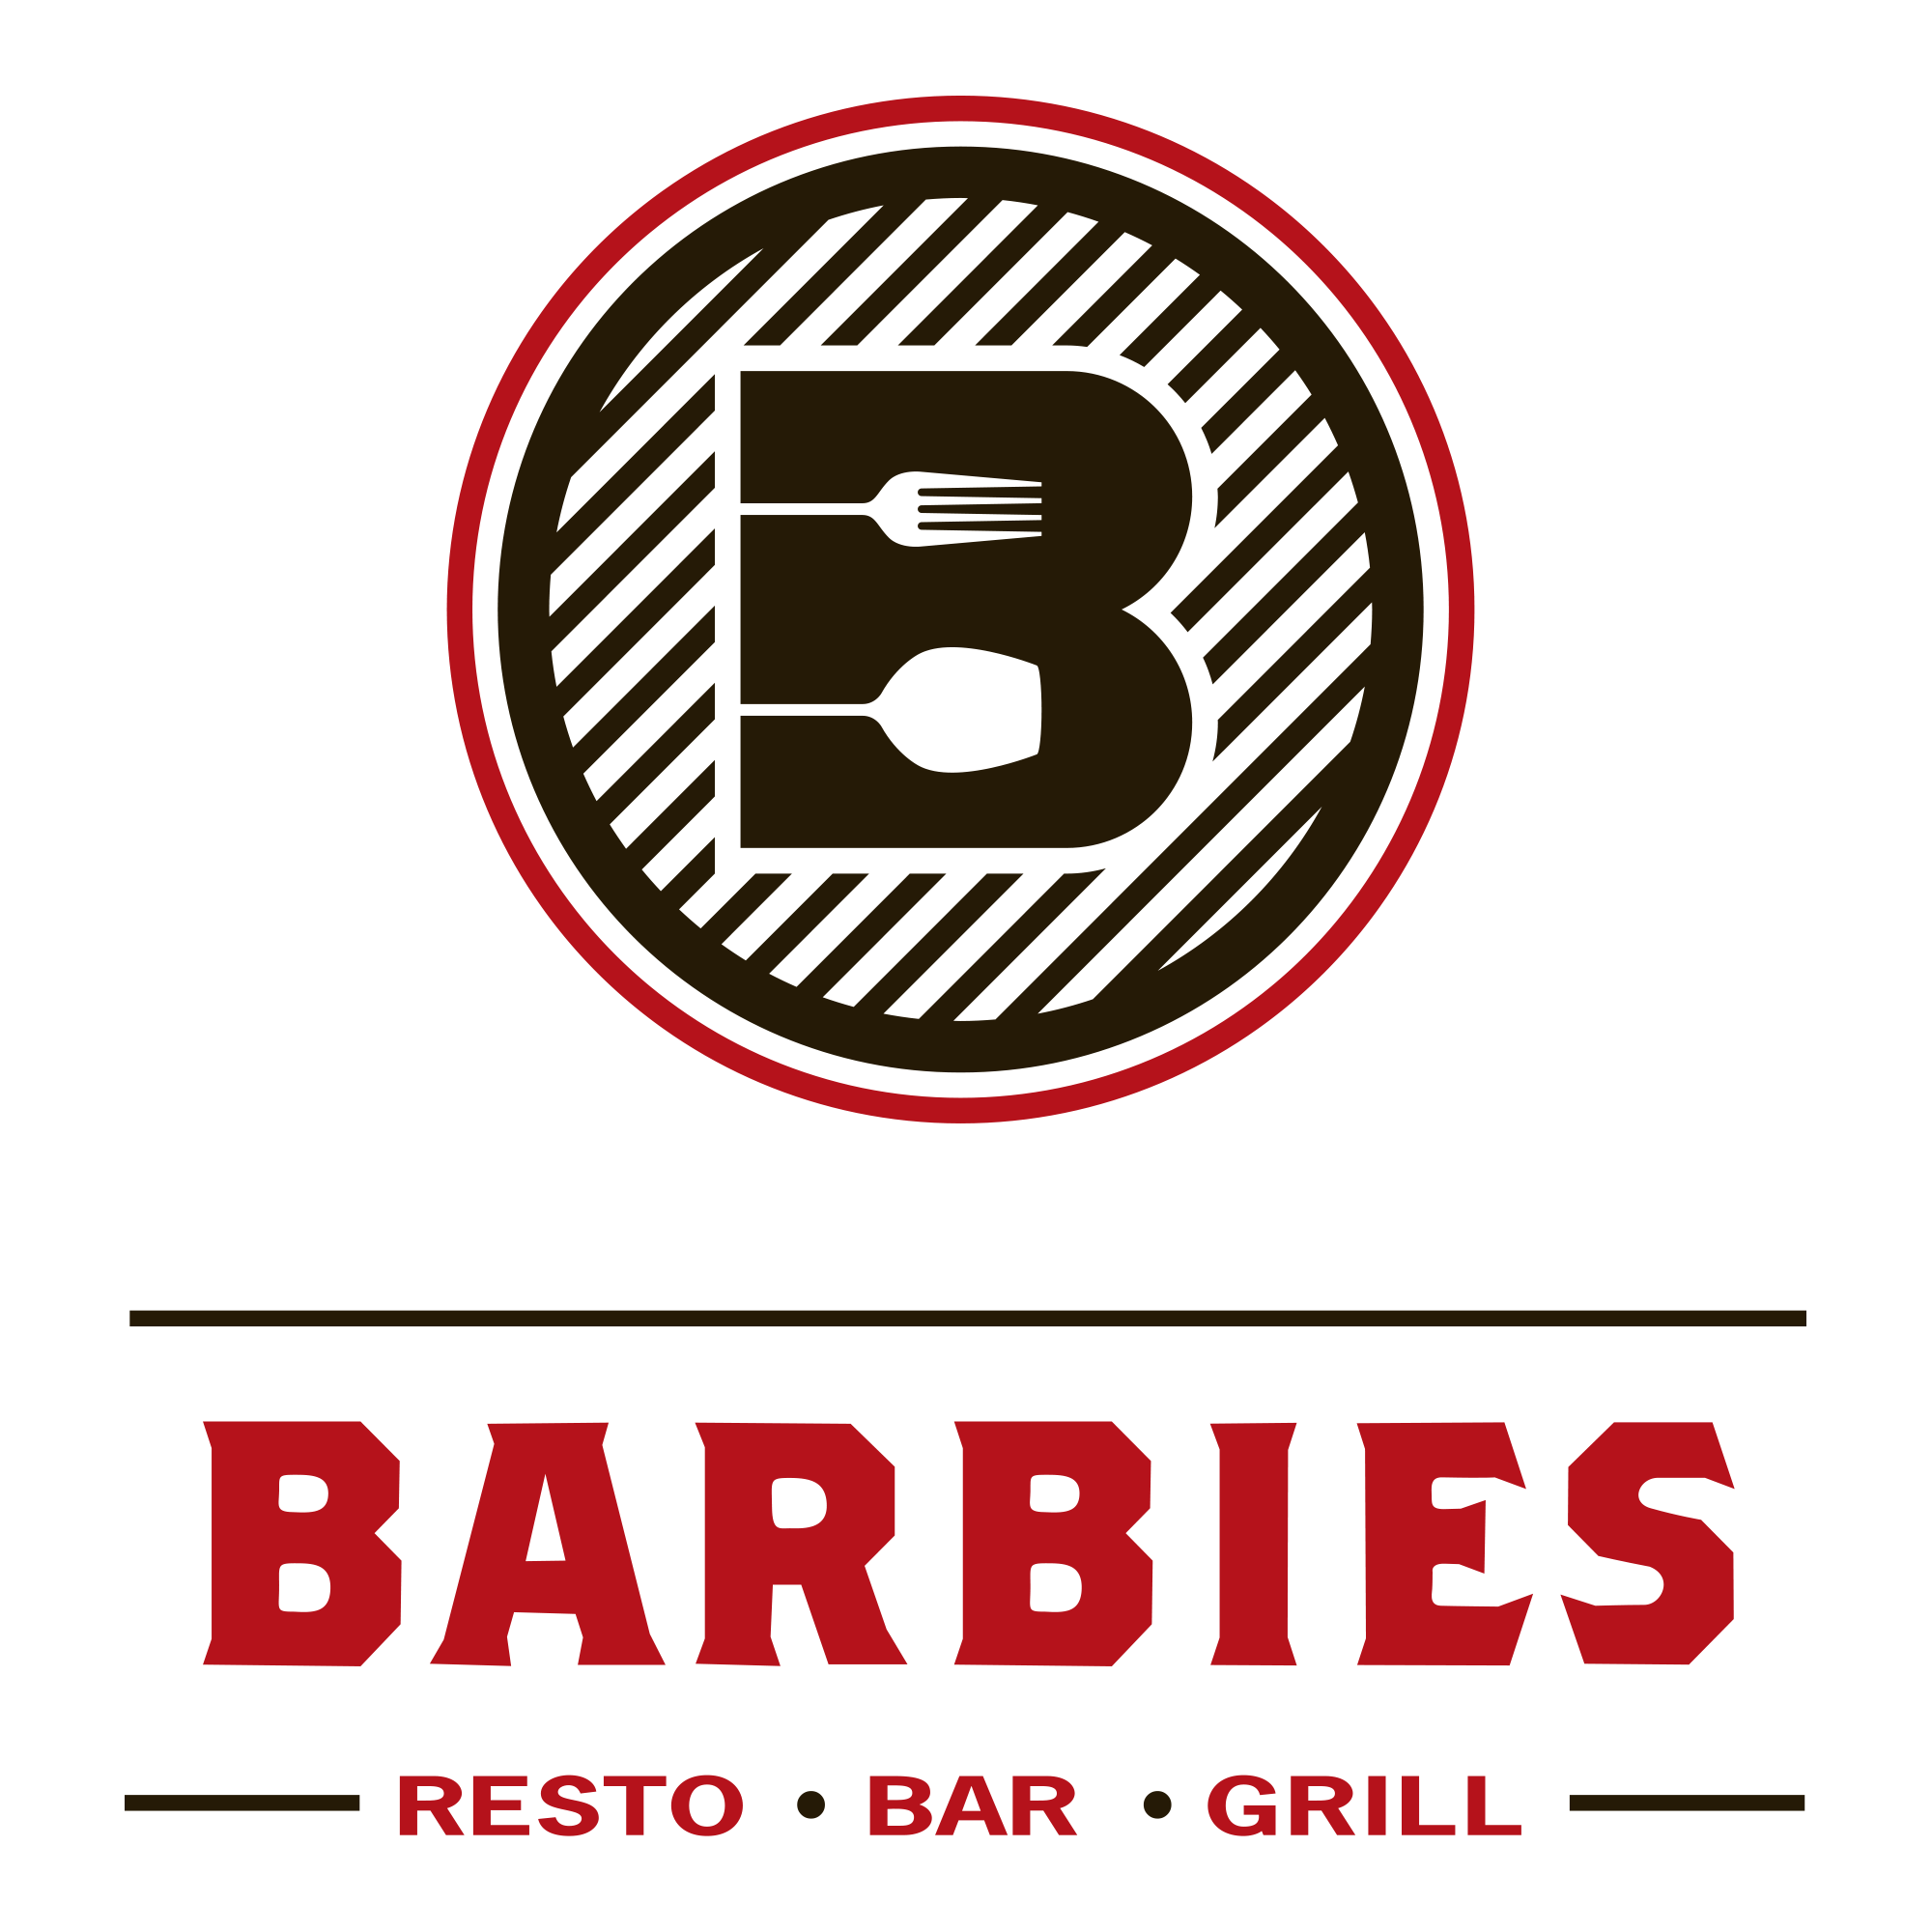 Restaurant Bar and Grill Logo - Family Restaurant - Barbecue Grill | Barbies Resto Bar Grill